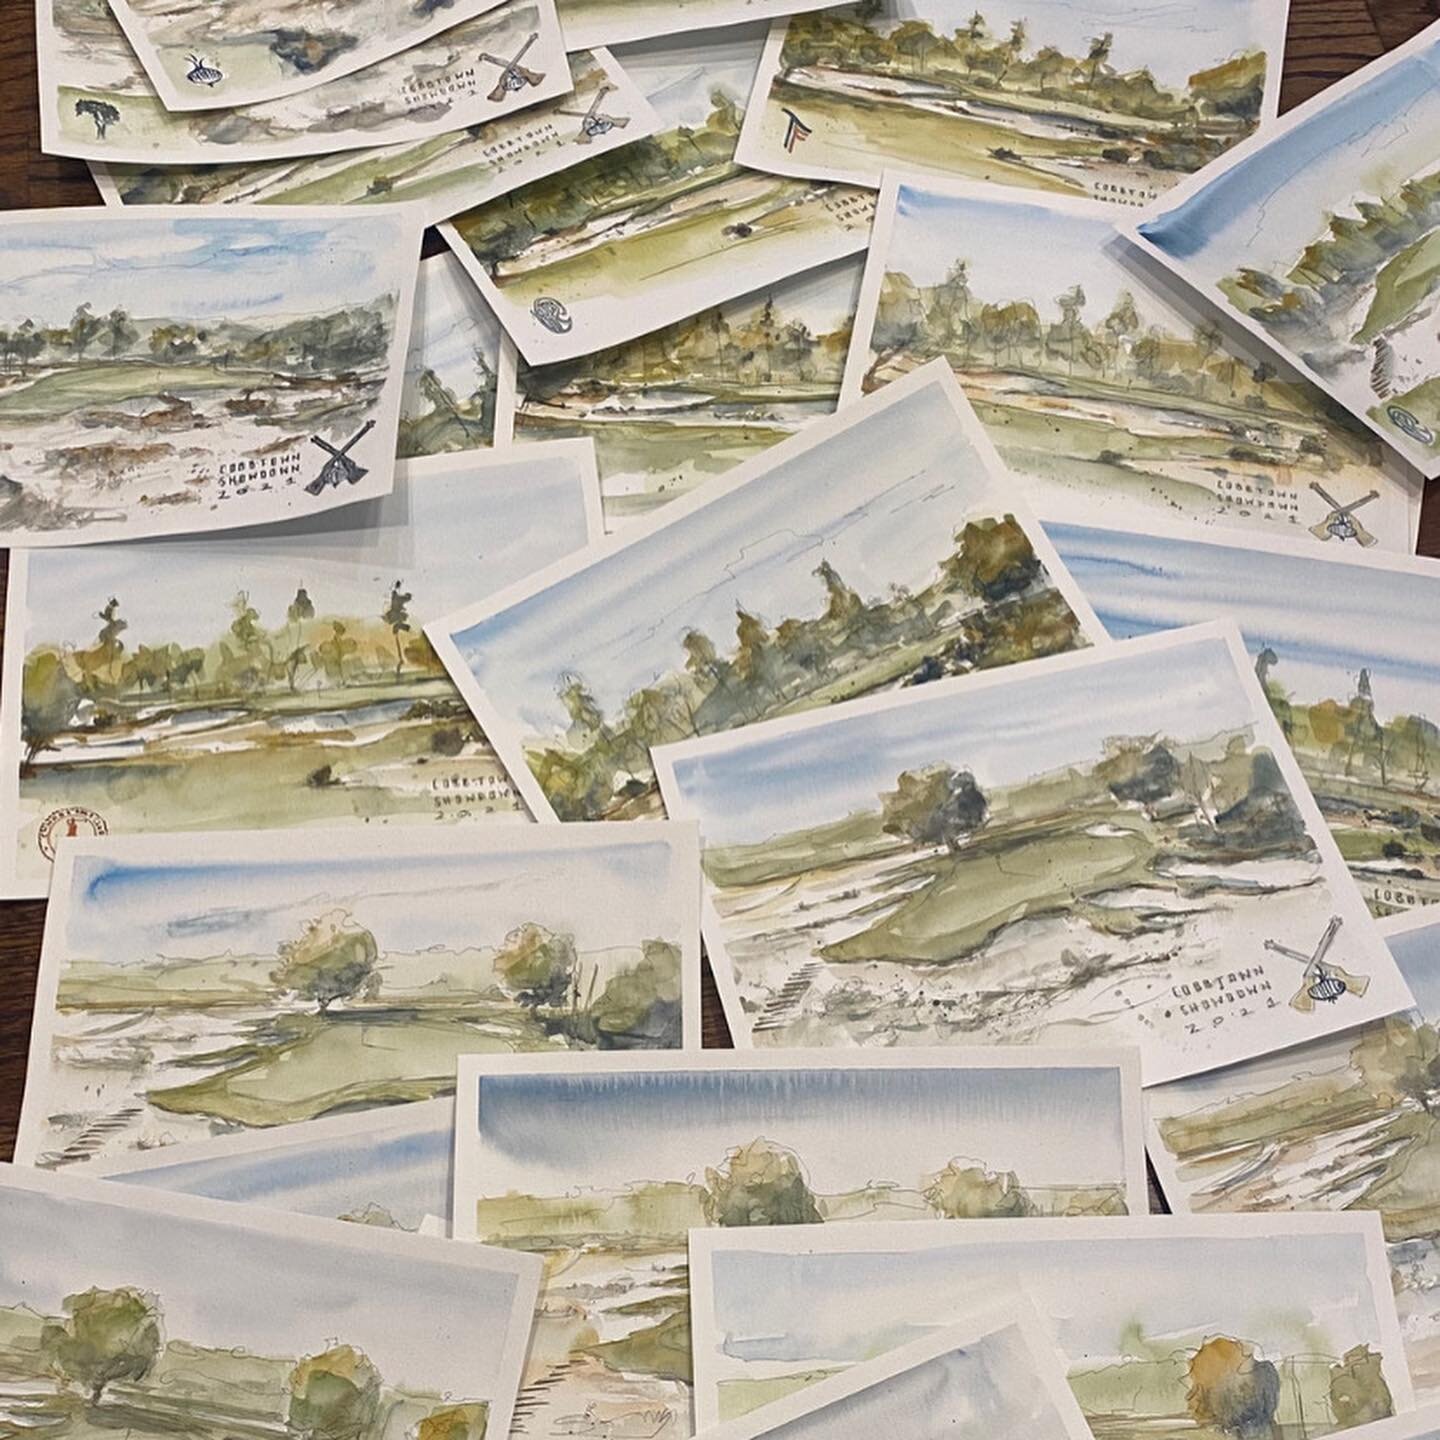 Was honored to be asked to paint 48 original pieces for the Ohoopee Pro-Member last weekend. Tackled No.s : 5, 16, 17, 18 - each painted 12 times. 
.
#golf #golfart #ohoopeematchclub #watercolor #